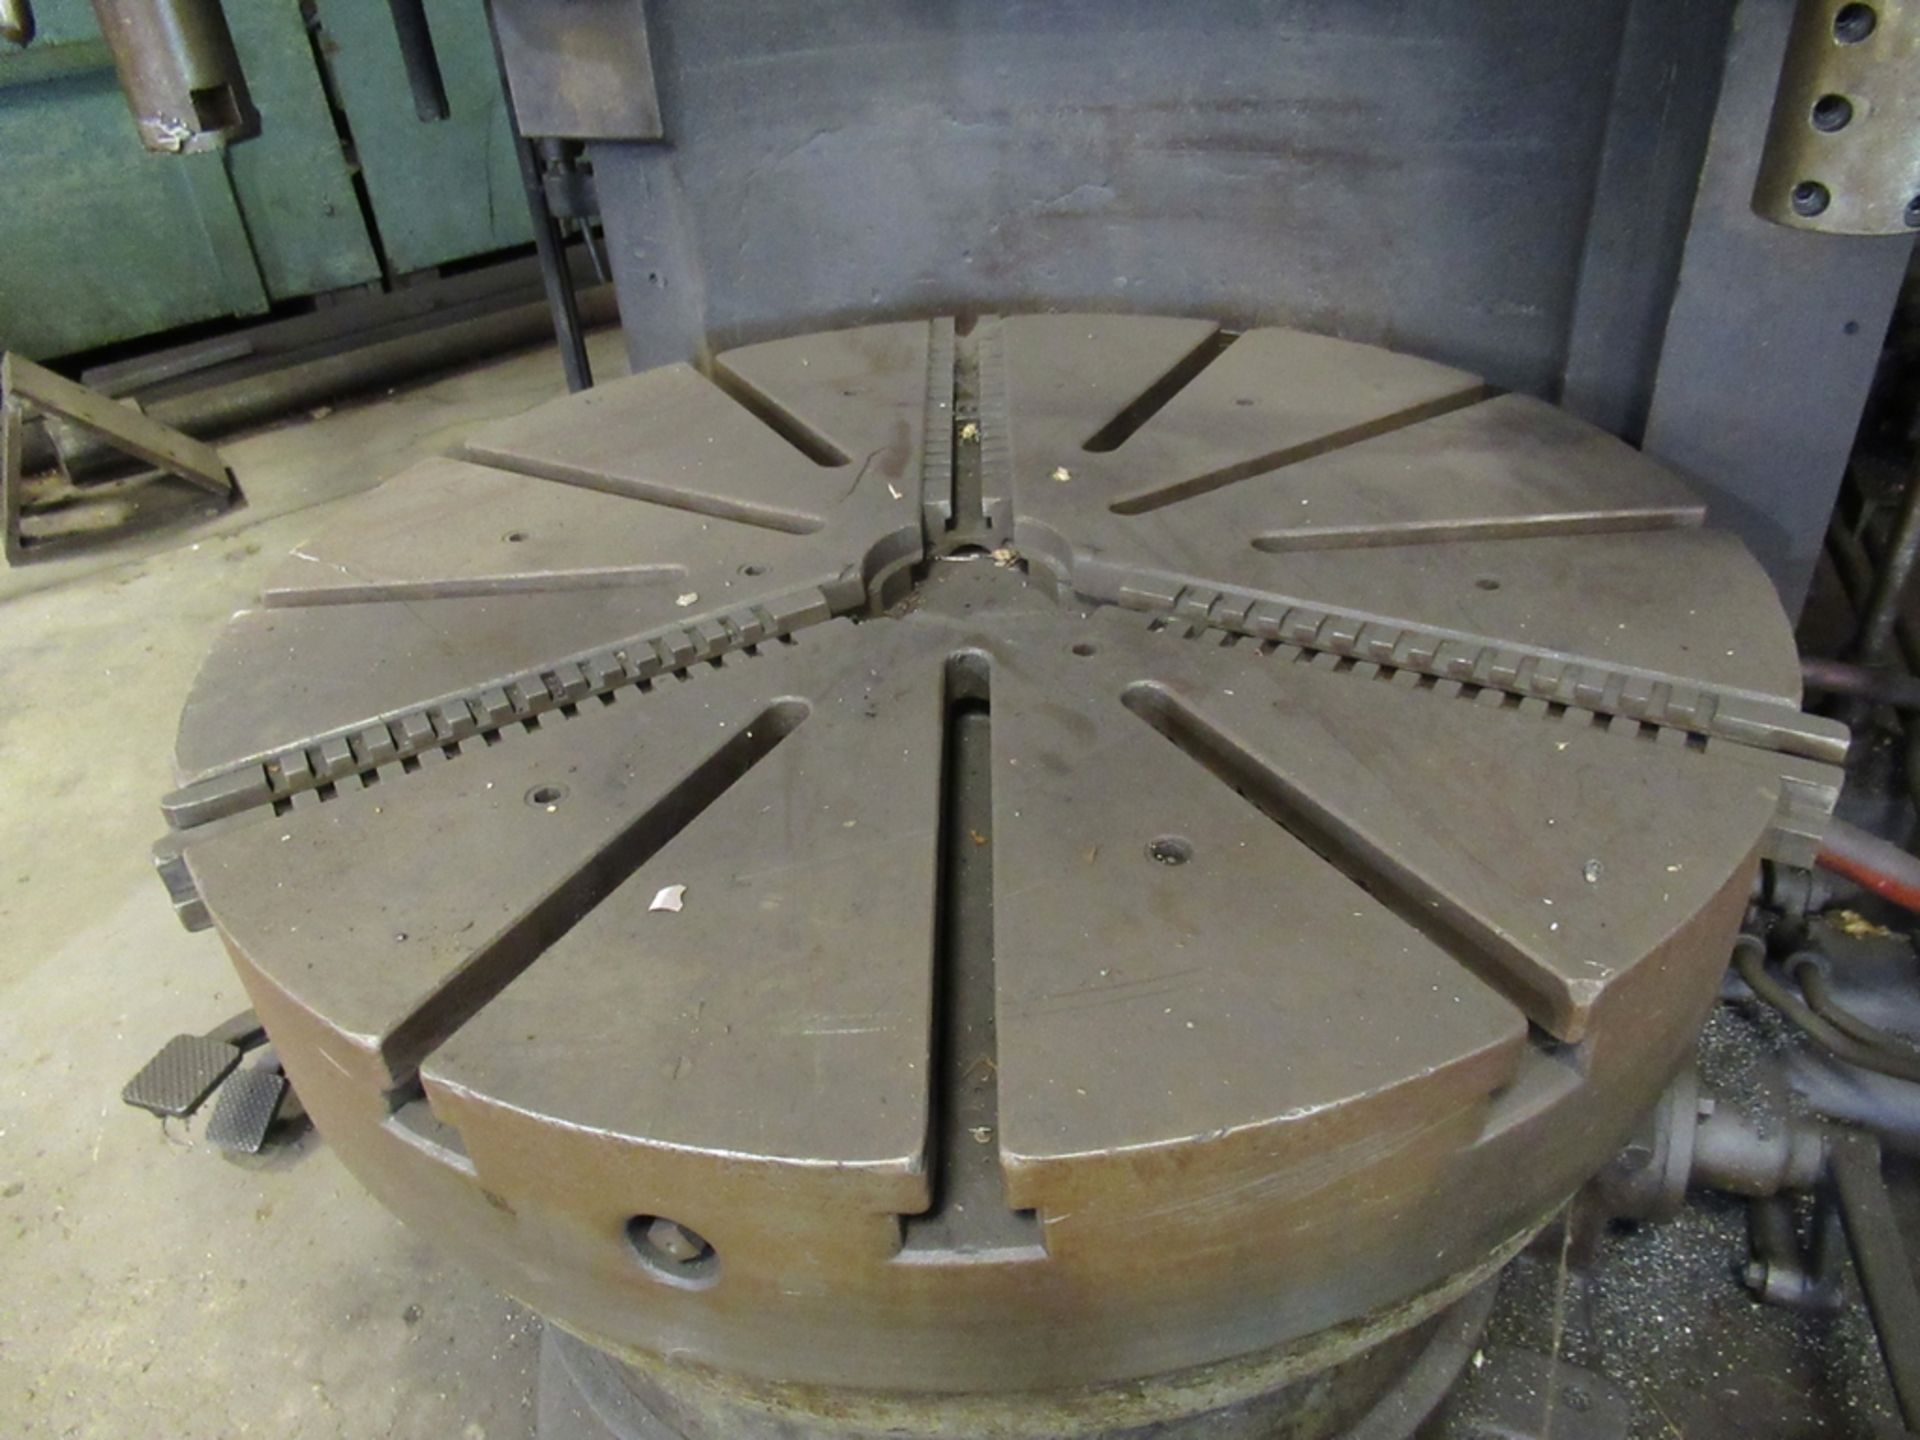 KING 42” VERTICAL BORING MILL, S/N 60222, 3-JAW CHUCK TABLE, WITH TURRET HEAD, SIDE HEAD, PENDANT - Image 2 of 4